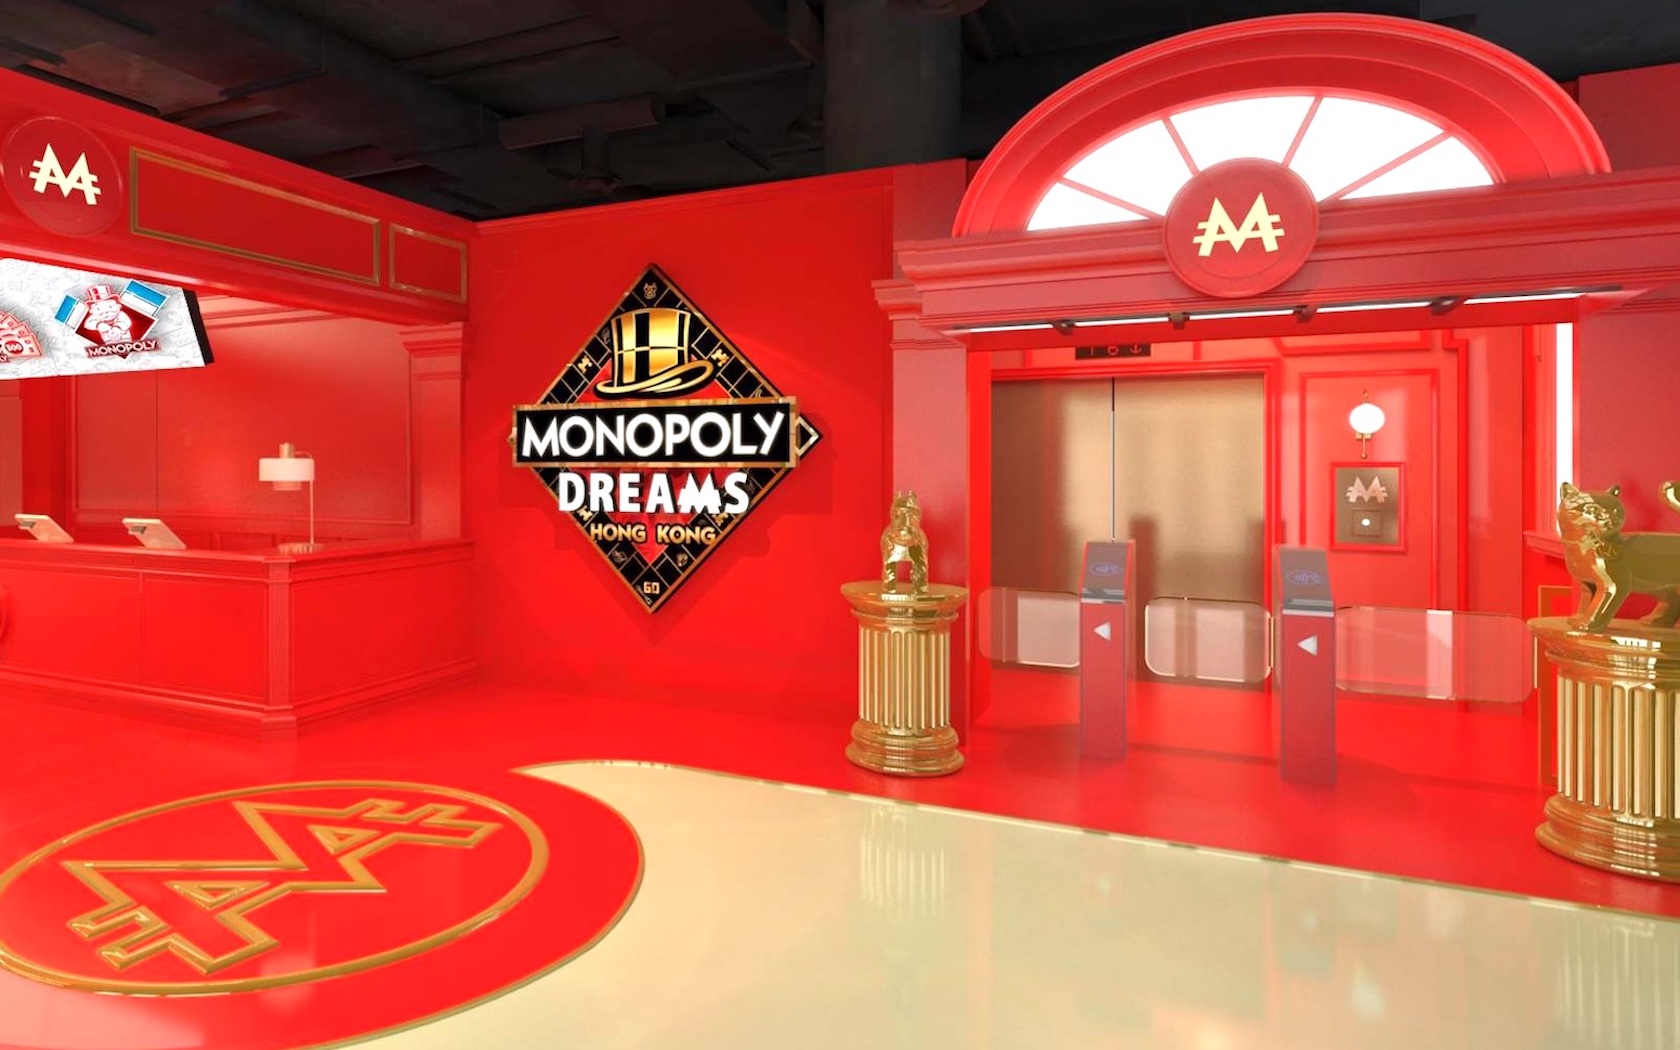 Monopoly Dreams is a new interactive game in Hong Kong.